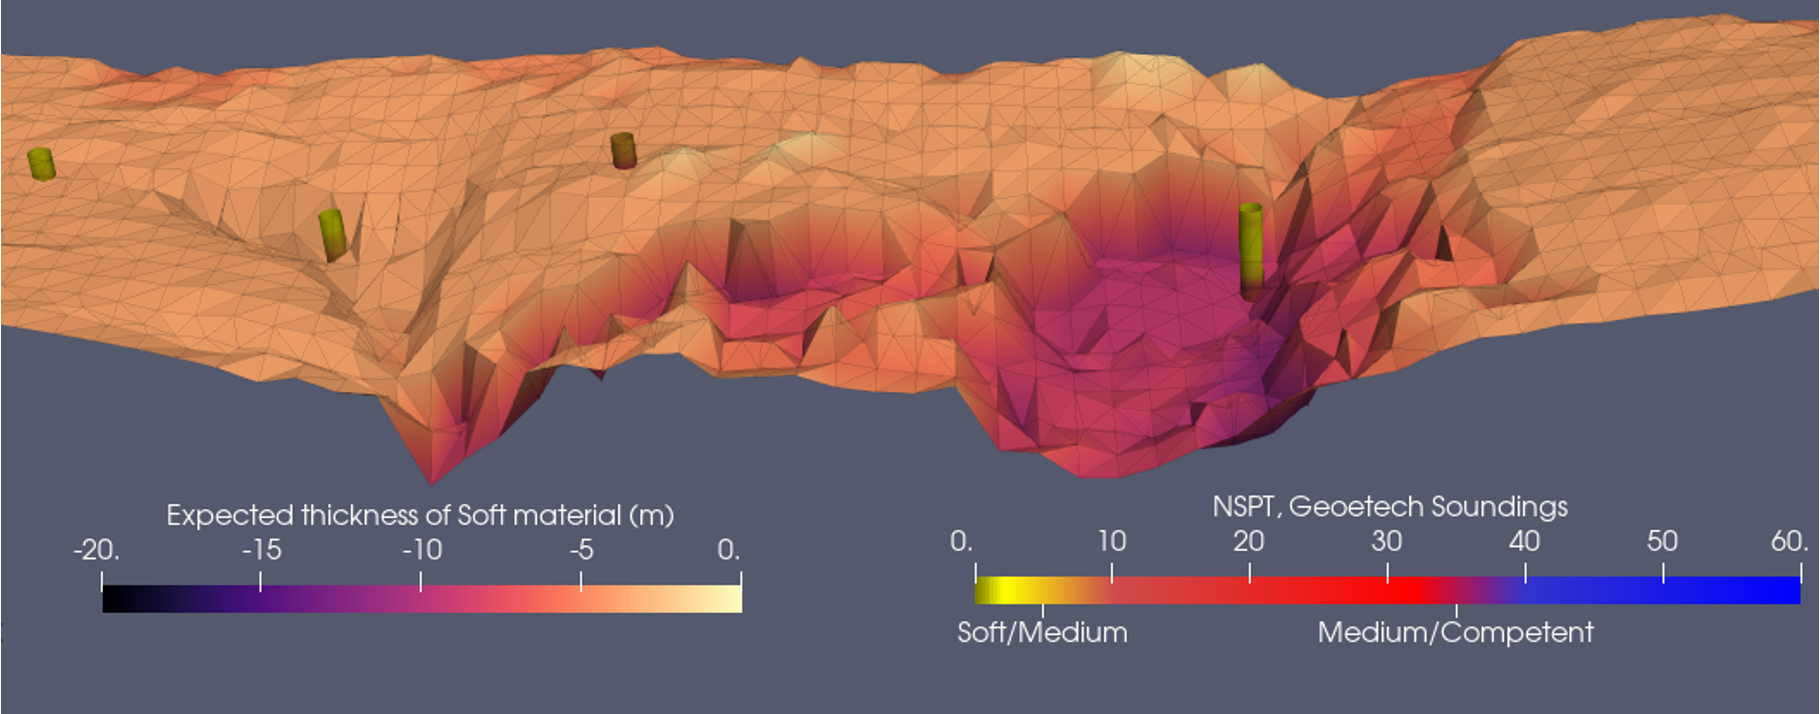 3D ground model crafted from geophysical and geotechnical data.